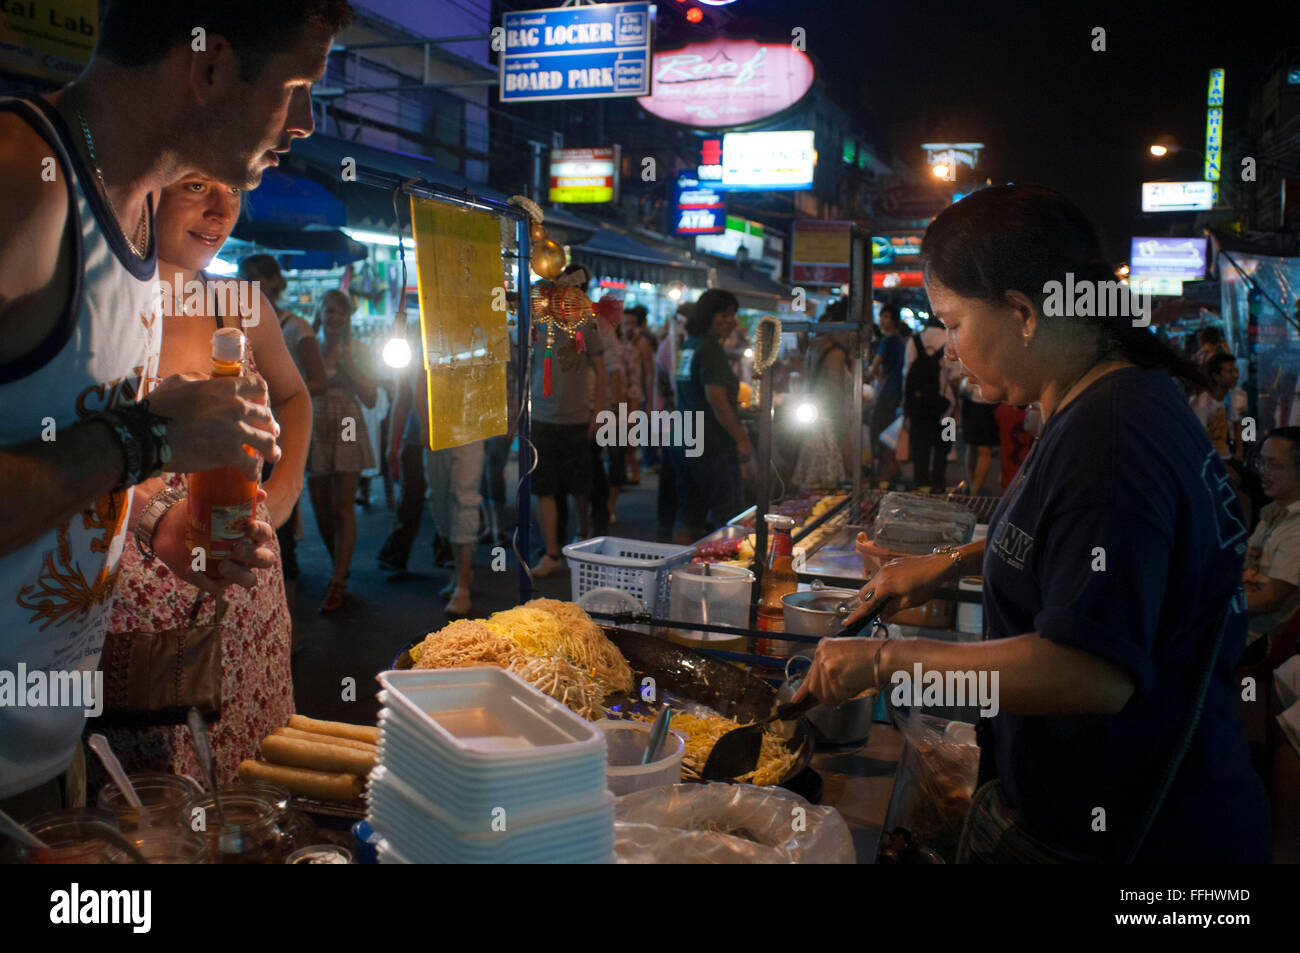 khao san road, noodles street stall. Food stall. Bangkok. Khaosan Road or Khao San Road is a short street in central Bangkok, Th Stock Photo